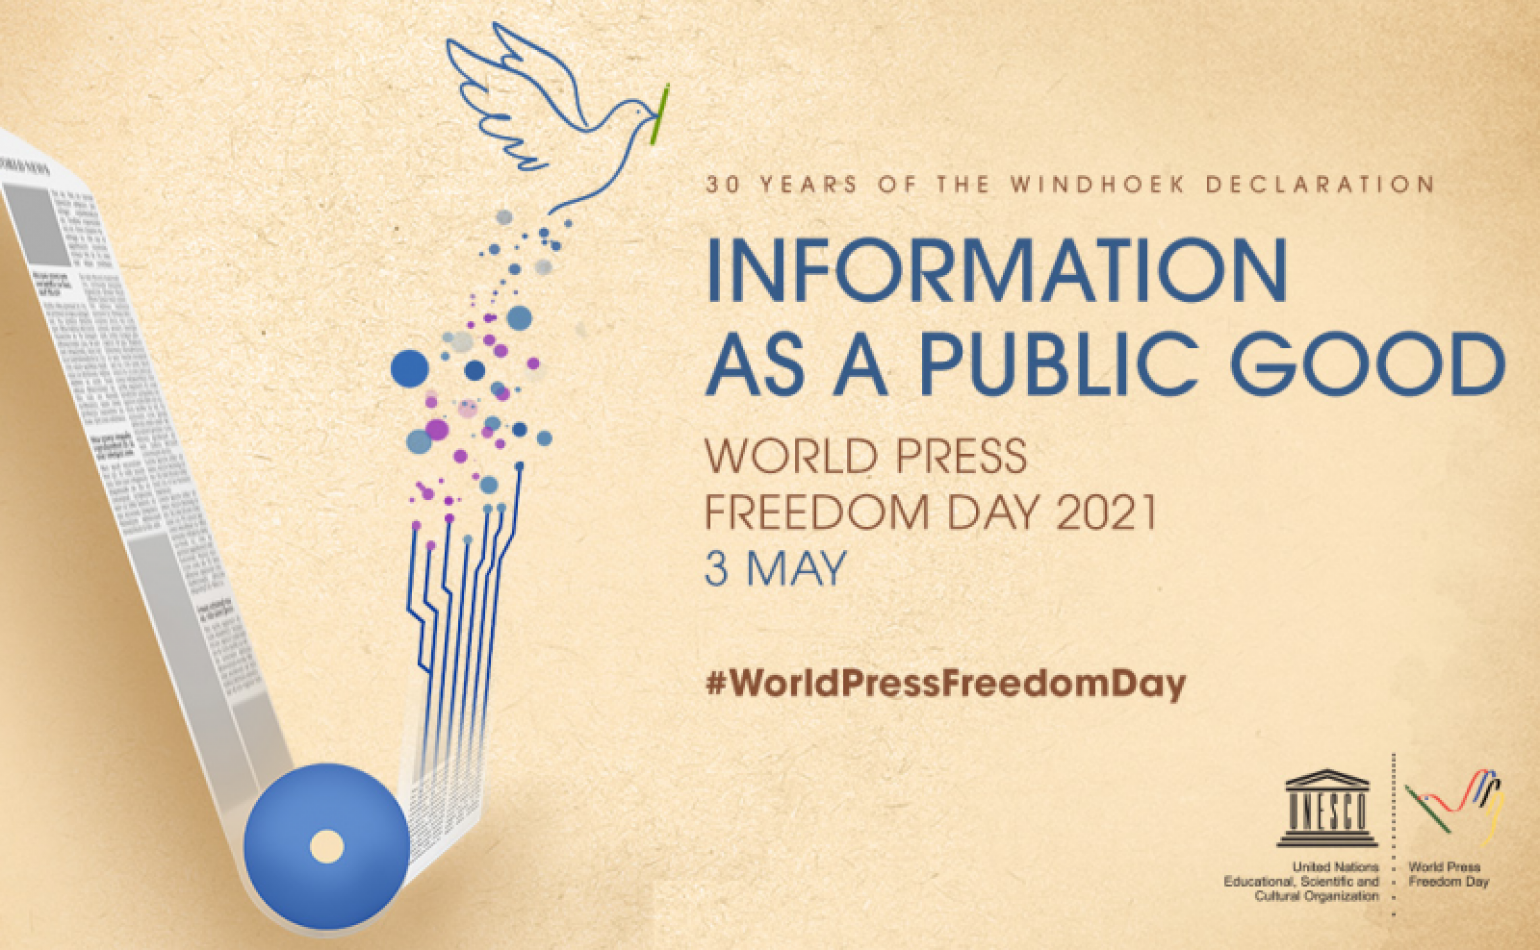 On this World Press Freedom Day 2021, Media Matters for Democracy reaffirms its support for free and independent journalism